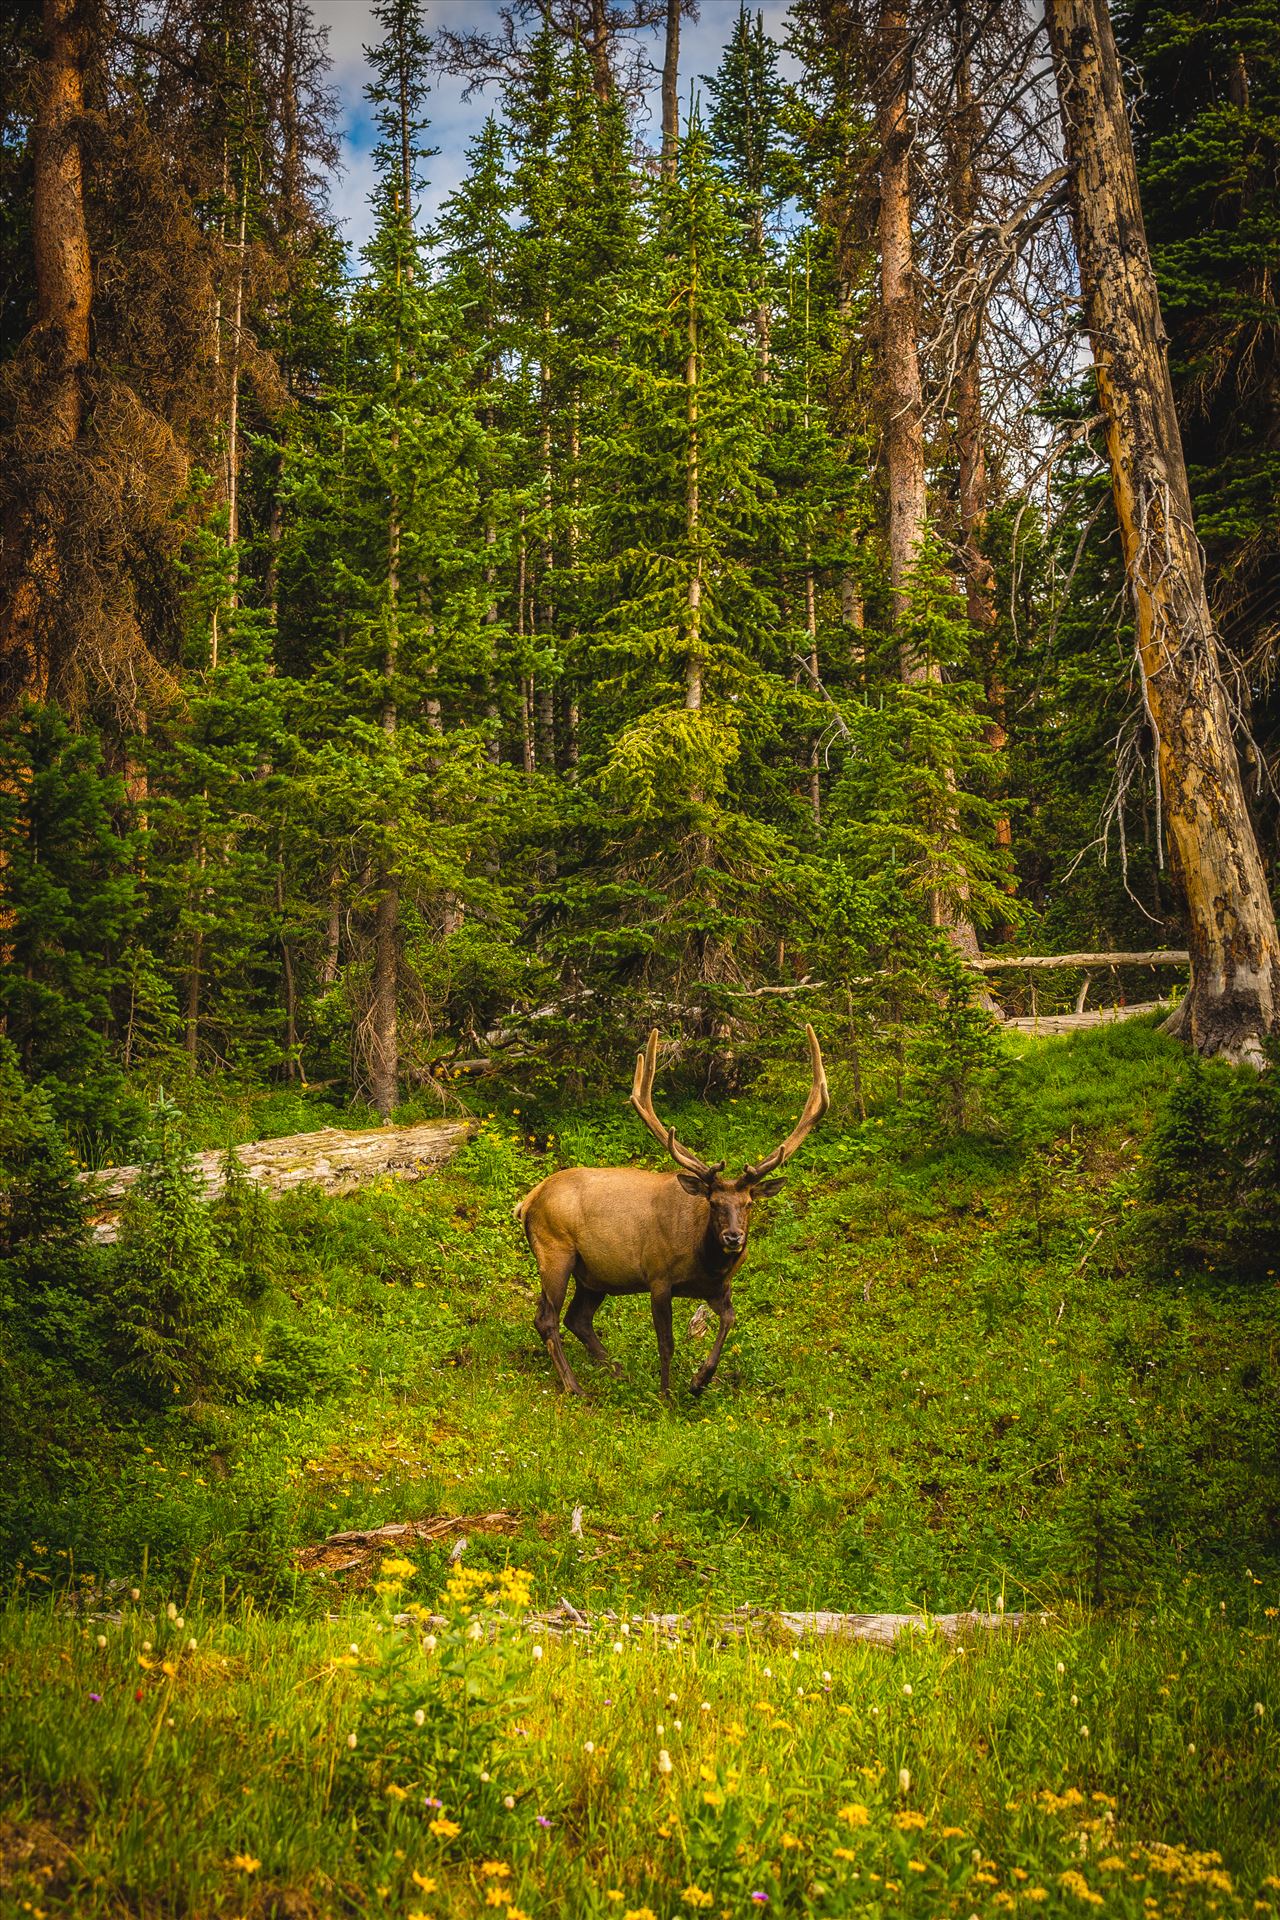 Elk in the Wild - A large elk bull grazes on summer foliage in the Rocky Mountain National Park. by Scott Smith Photography Test